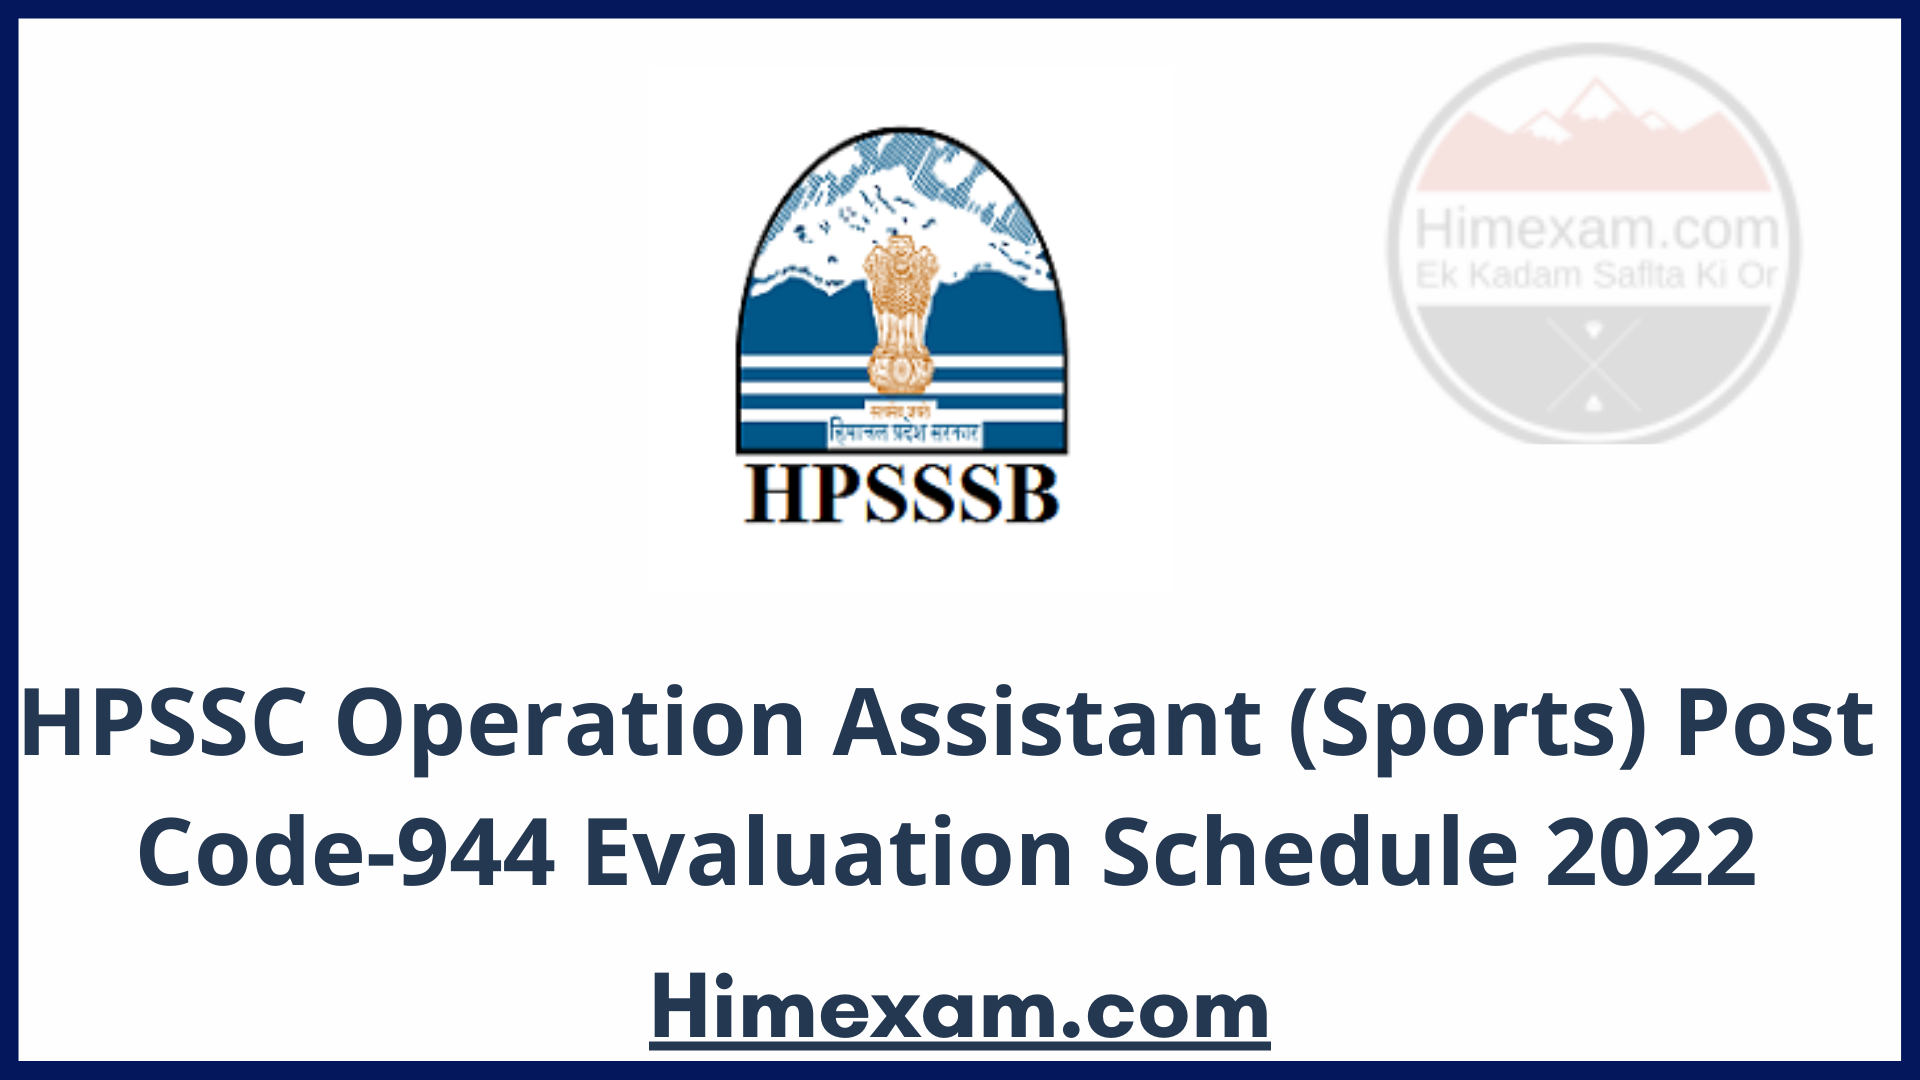 HPSSC Operation Assistant (Sports) Post Code-944 Evaluation Schedule 2022